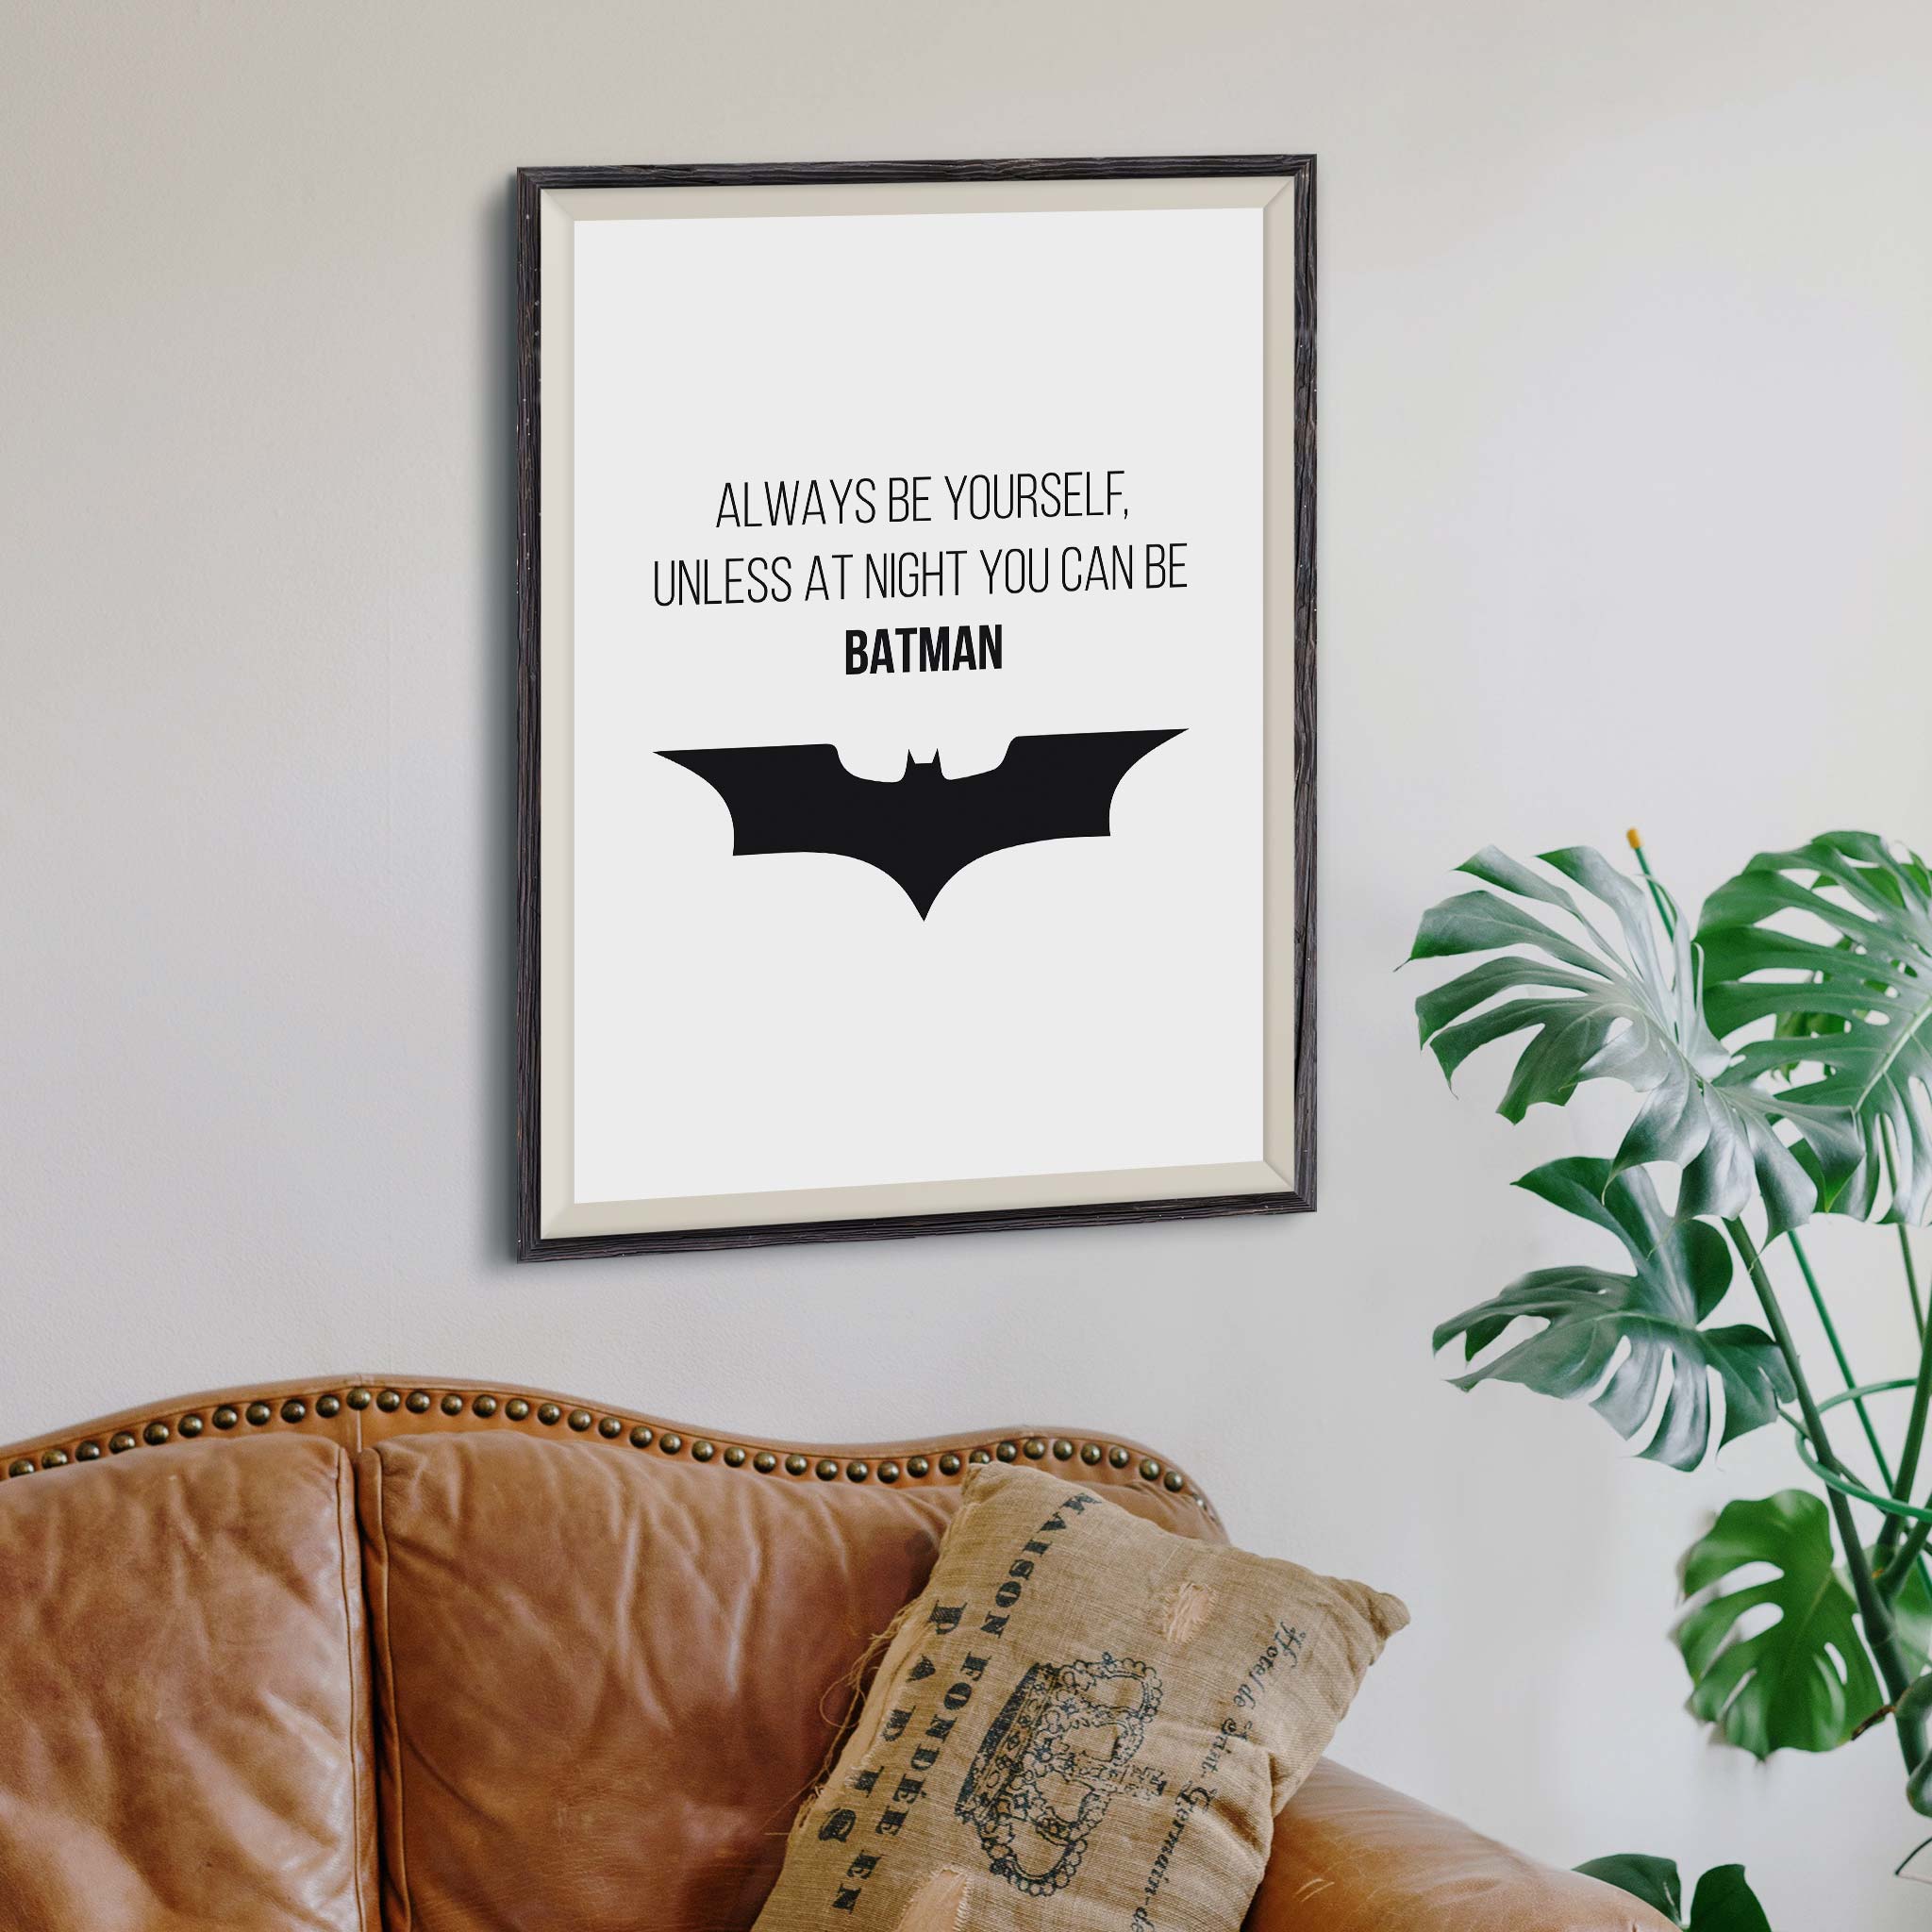 Always be yourself, unless at night you can be Batman